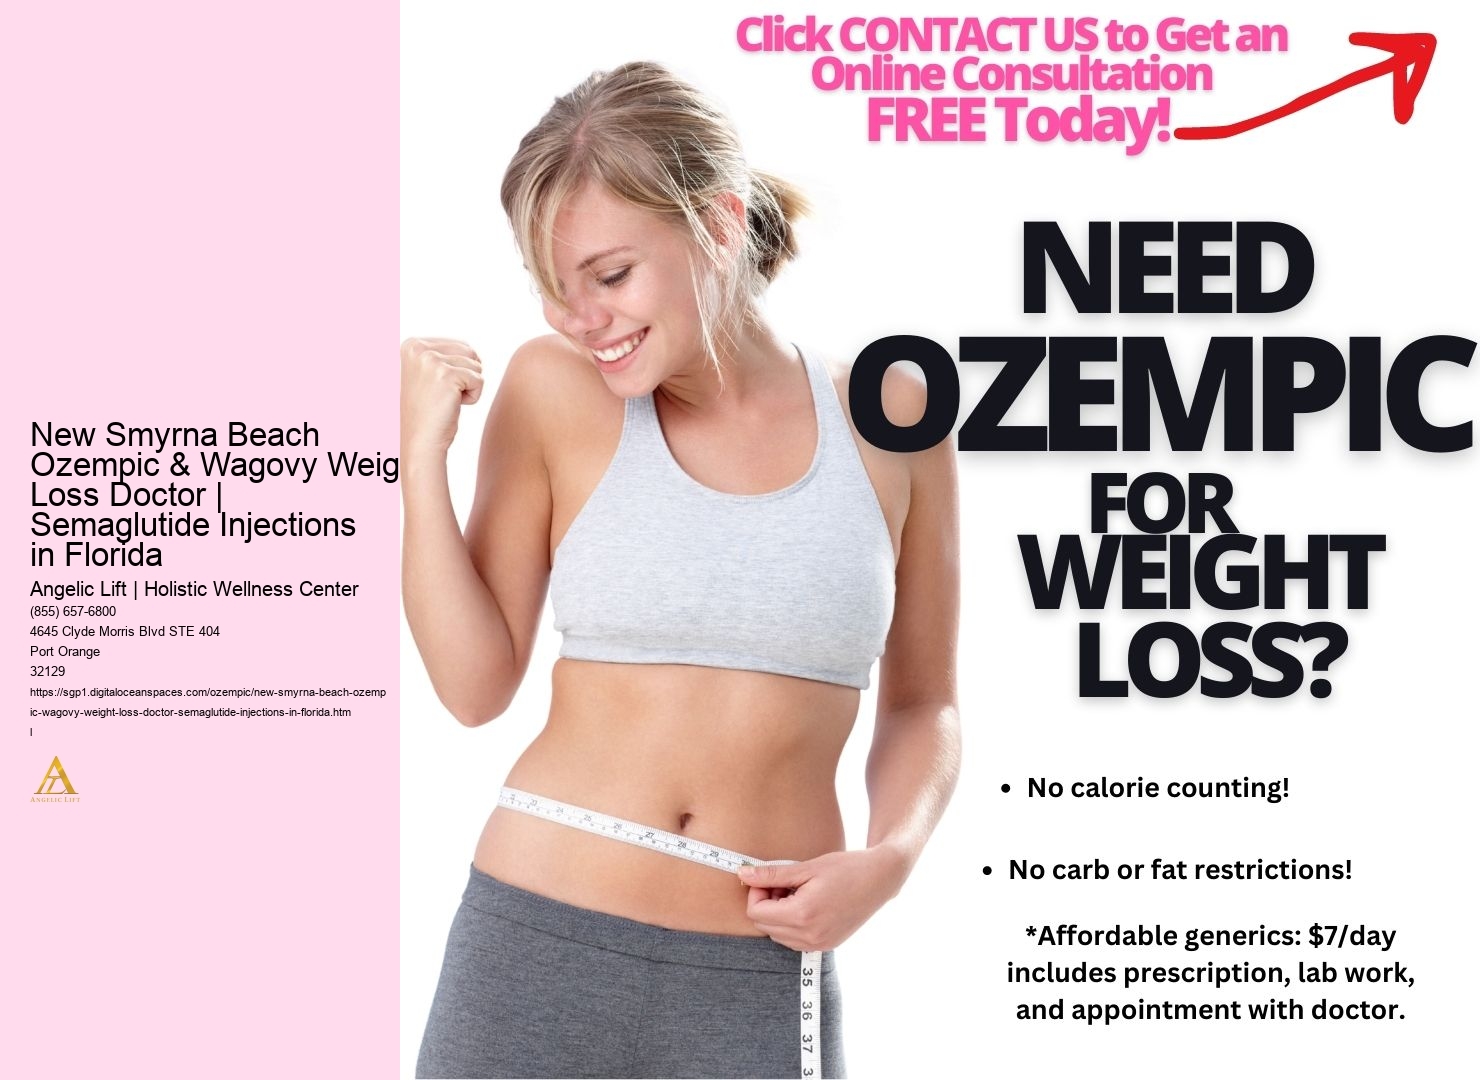 New Smyrna Beach Ozempic & Wagovy Weight Loss Doctor | Semaglutide Injections in Florida